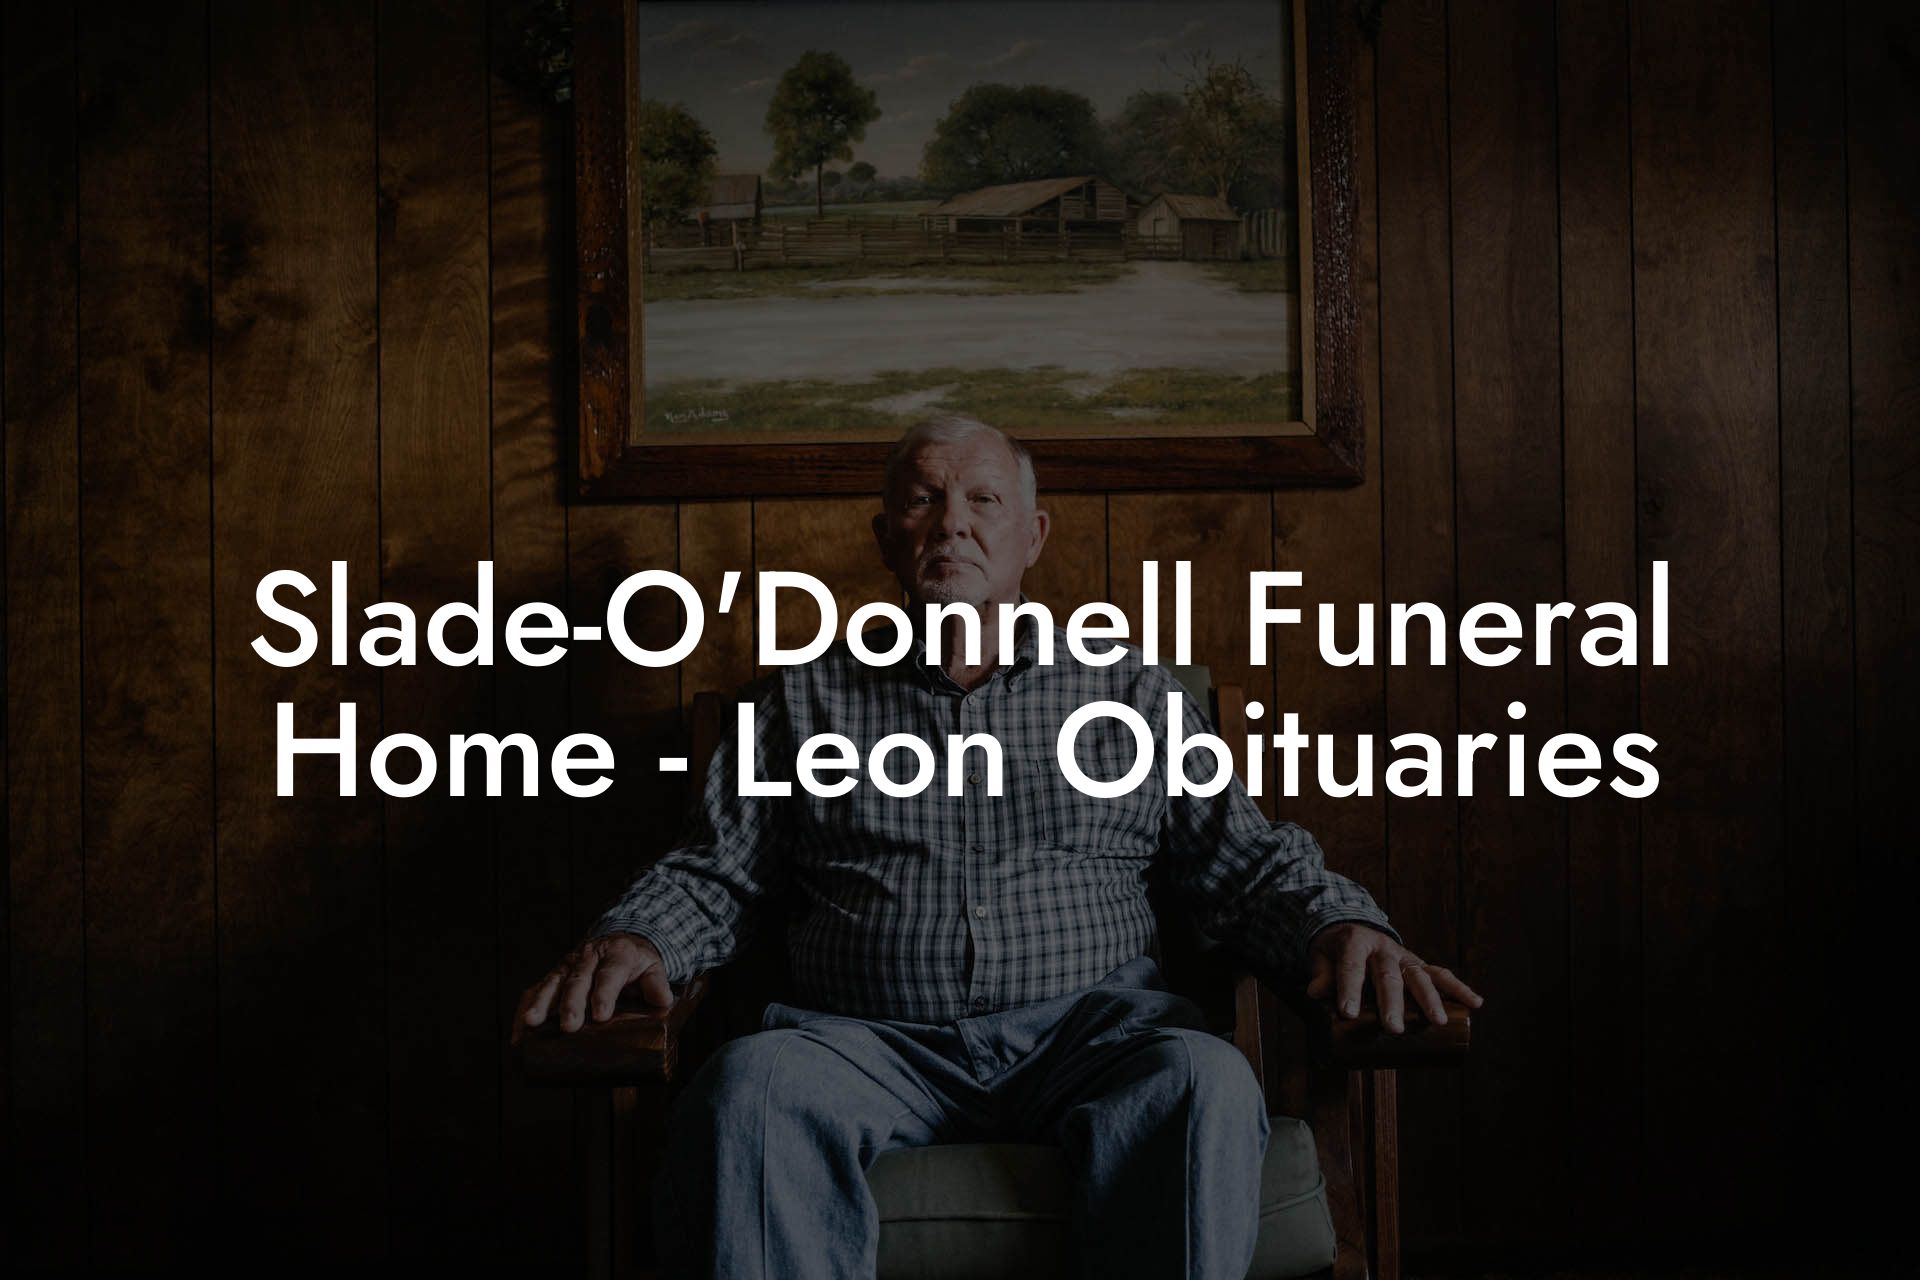 Slade-O'Donnell Funeral Home - Leon Obituaries